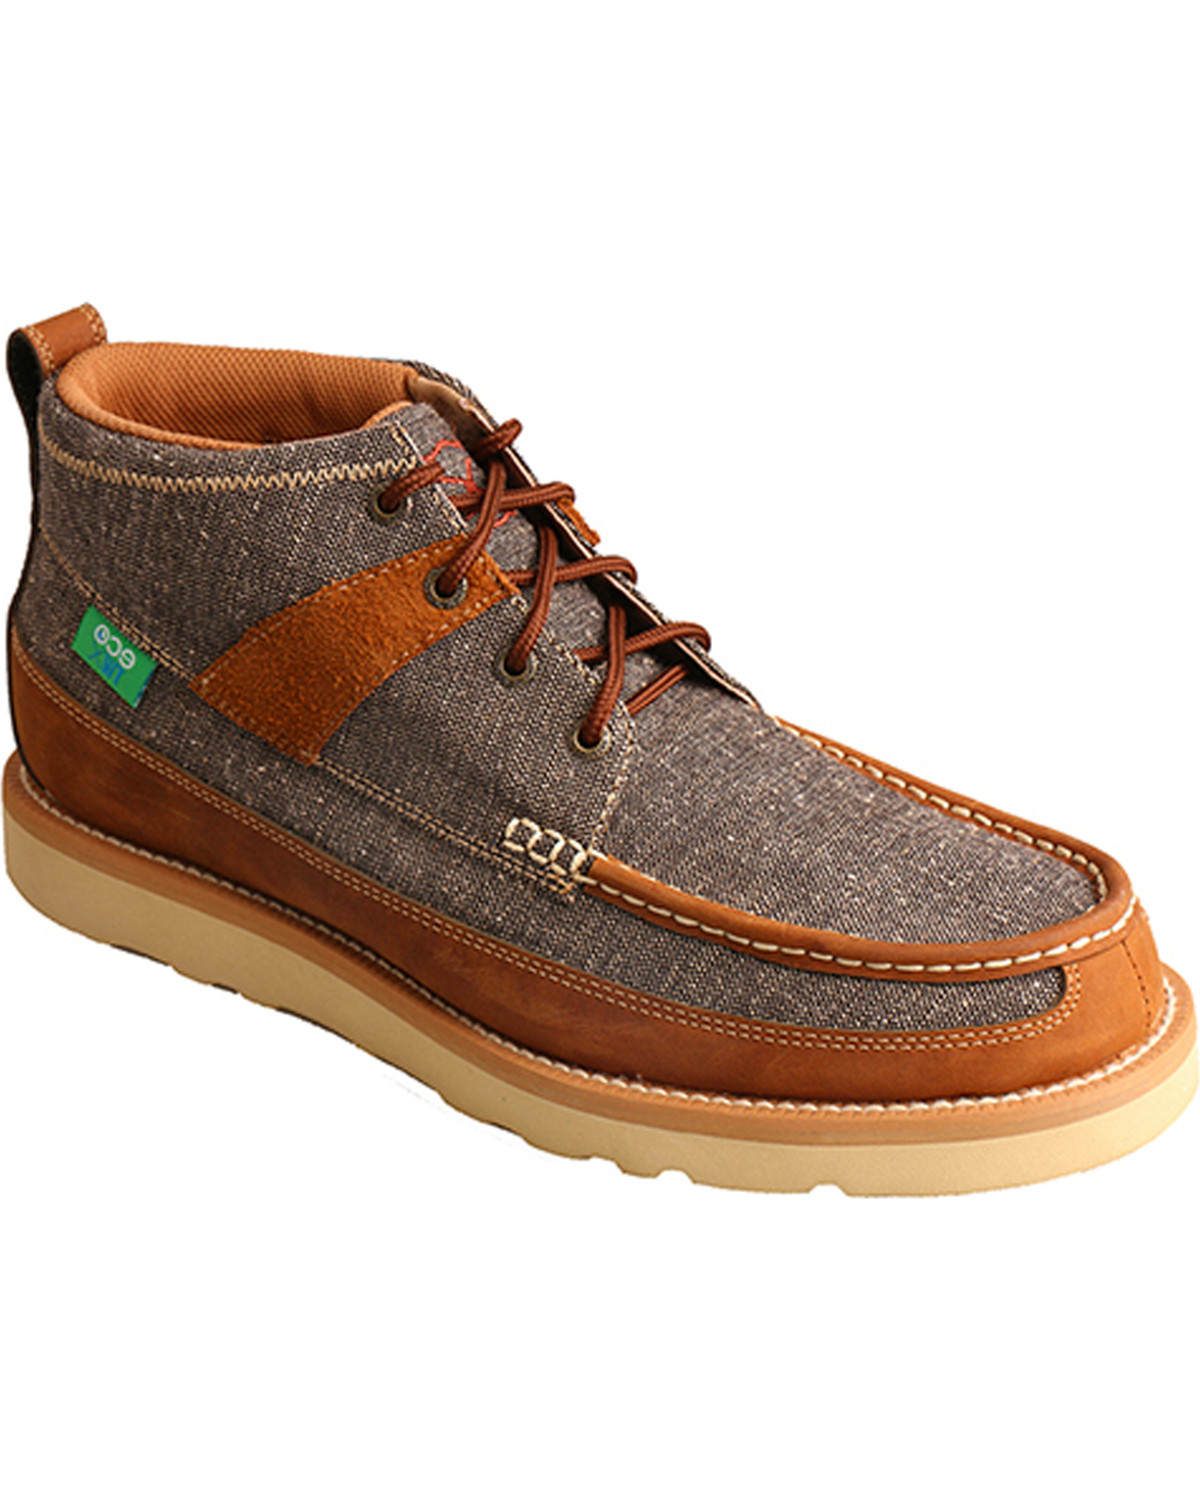 Twisted X Men's ECO TWX Casual Shoes - Moc Toe